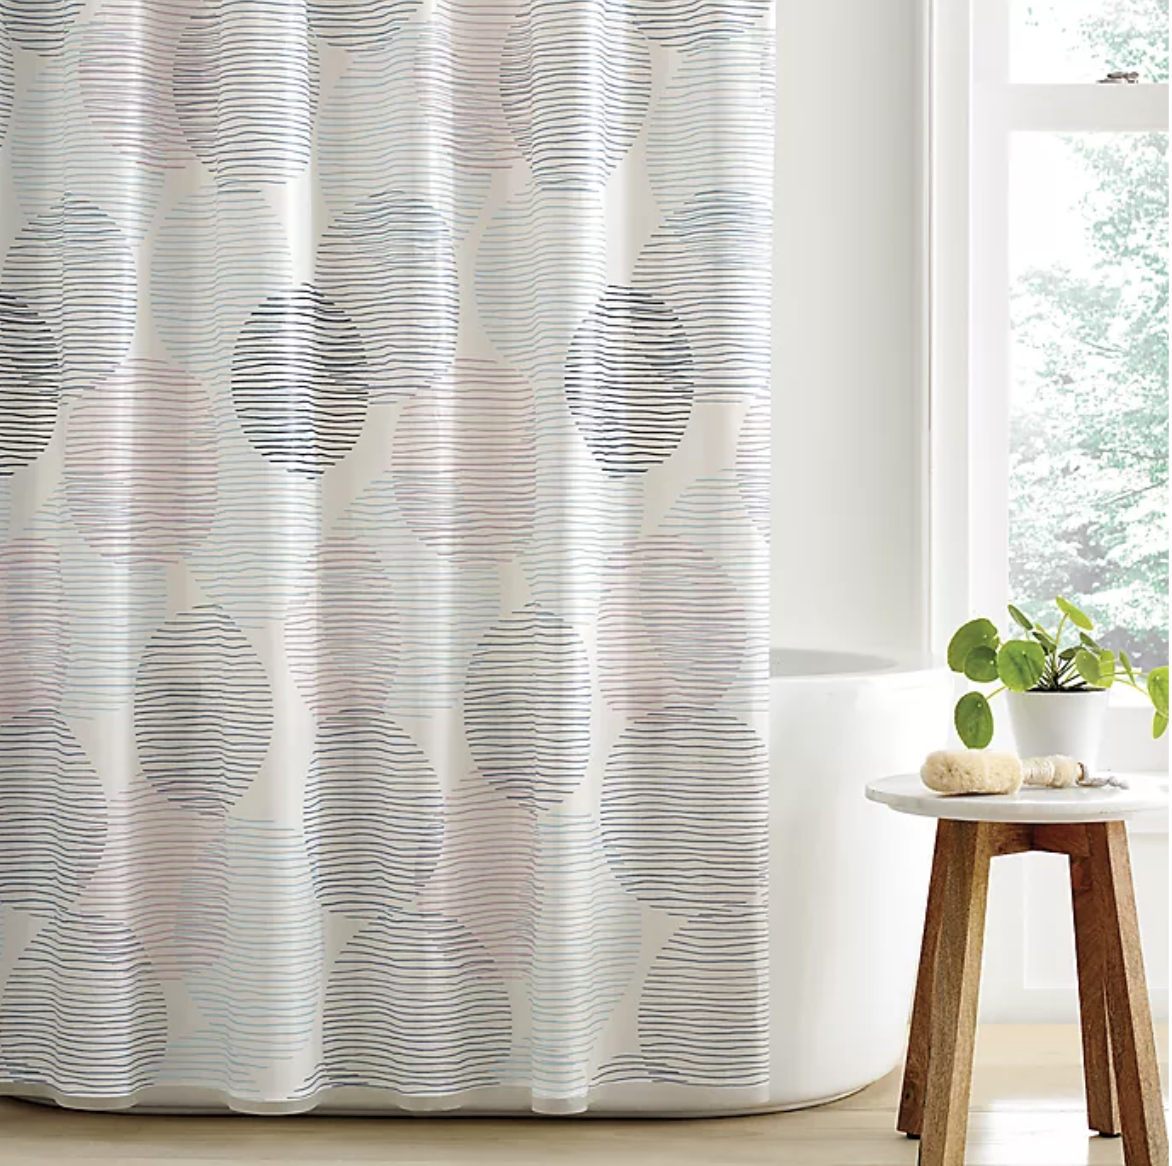 Shower curtain with lined design in ovals throughout